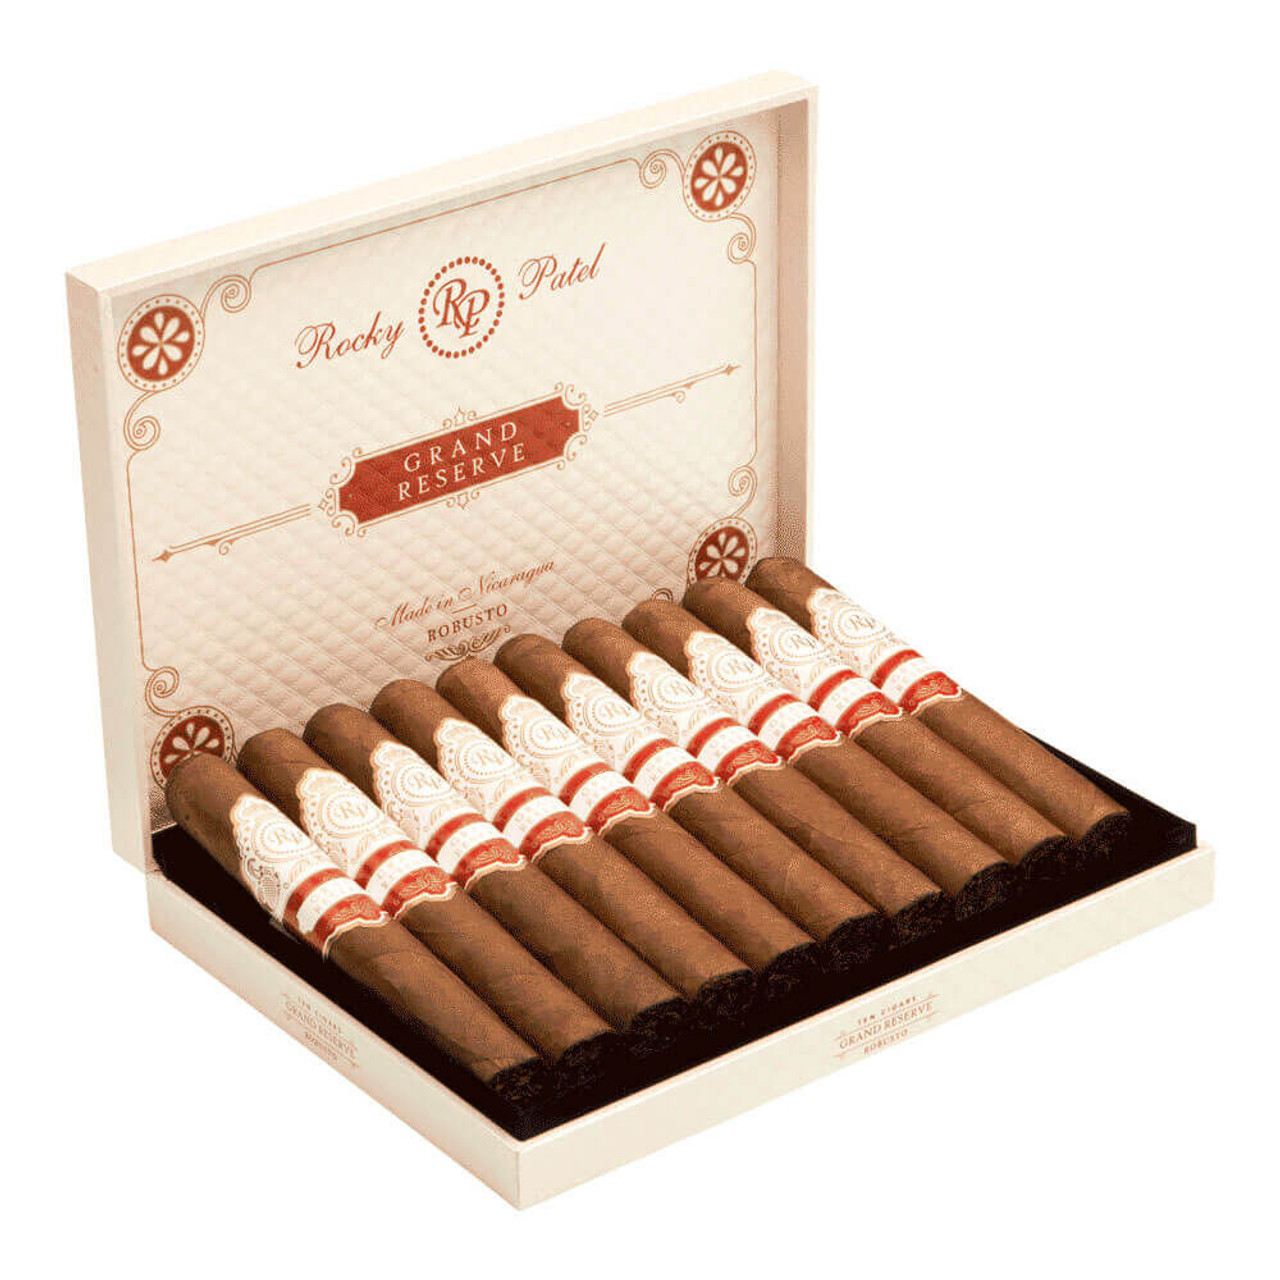 Rocky Patel Grand Reserve Sixty Cigars - 6 x 60 (Box of 10) Open